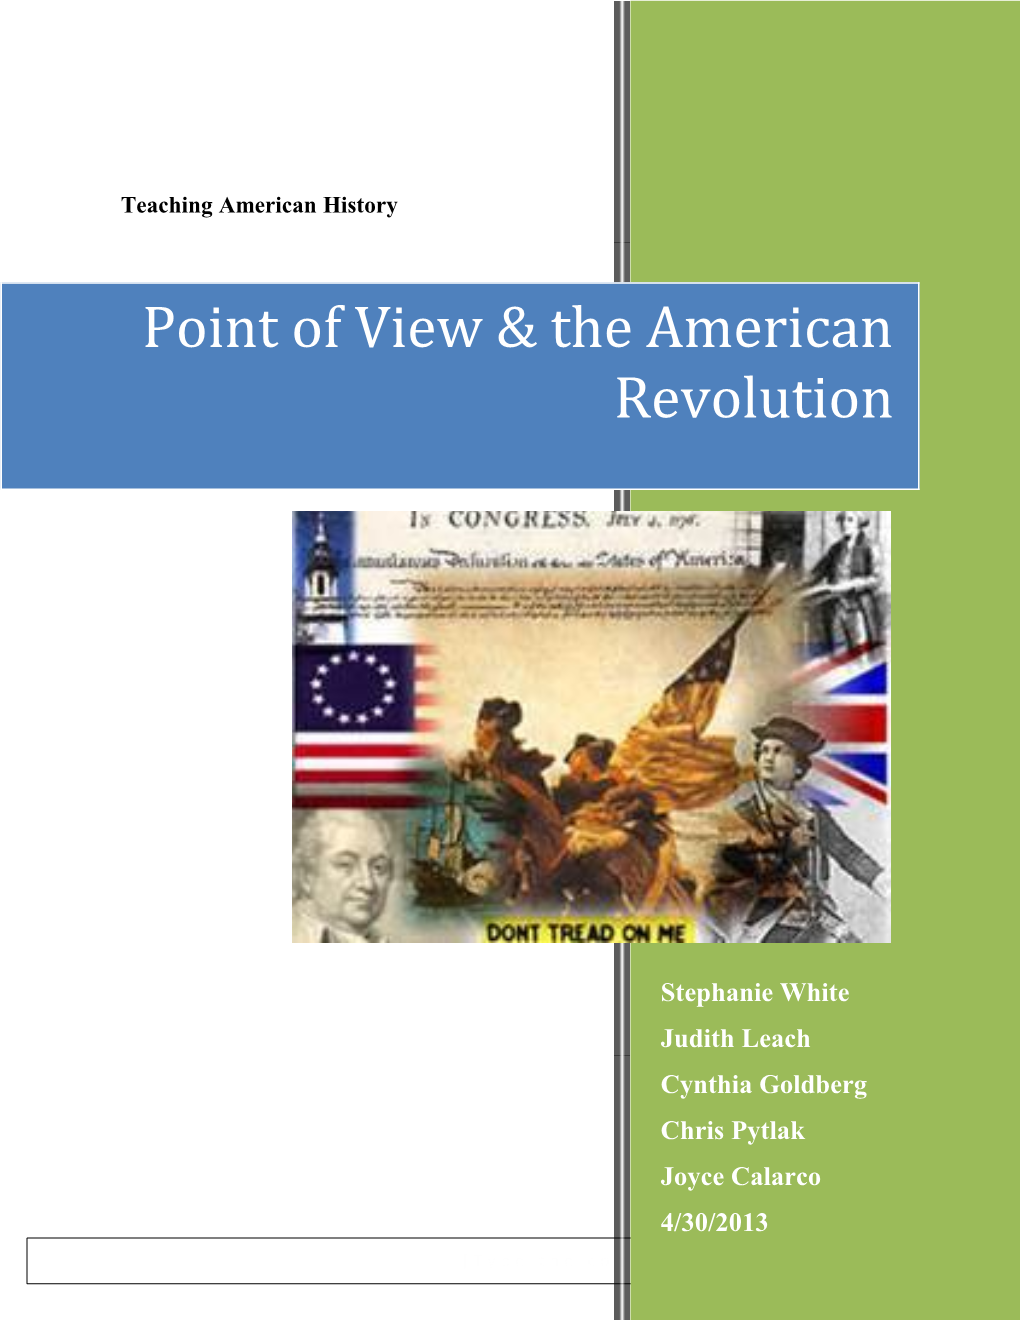 Point of View & the American Revolution